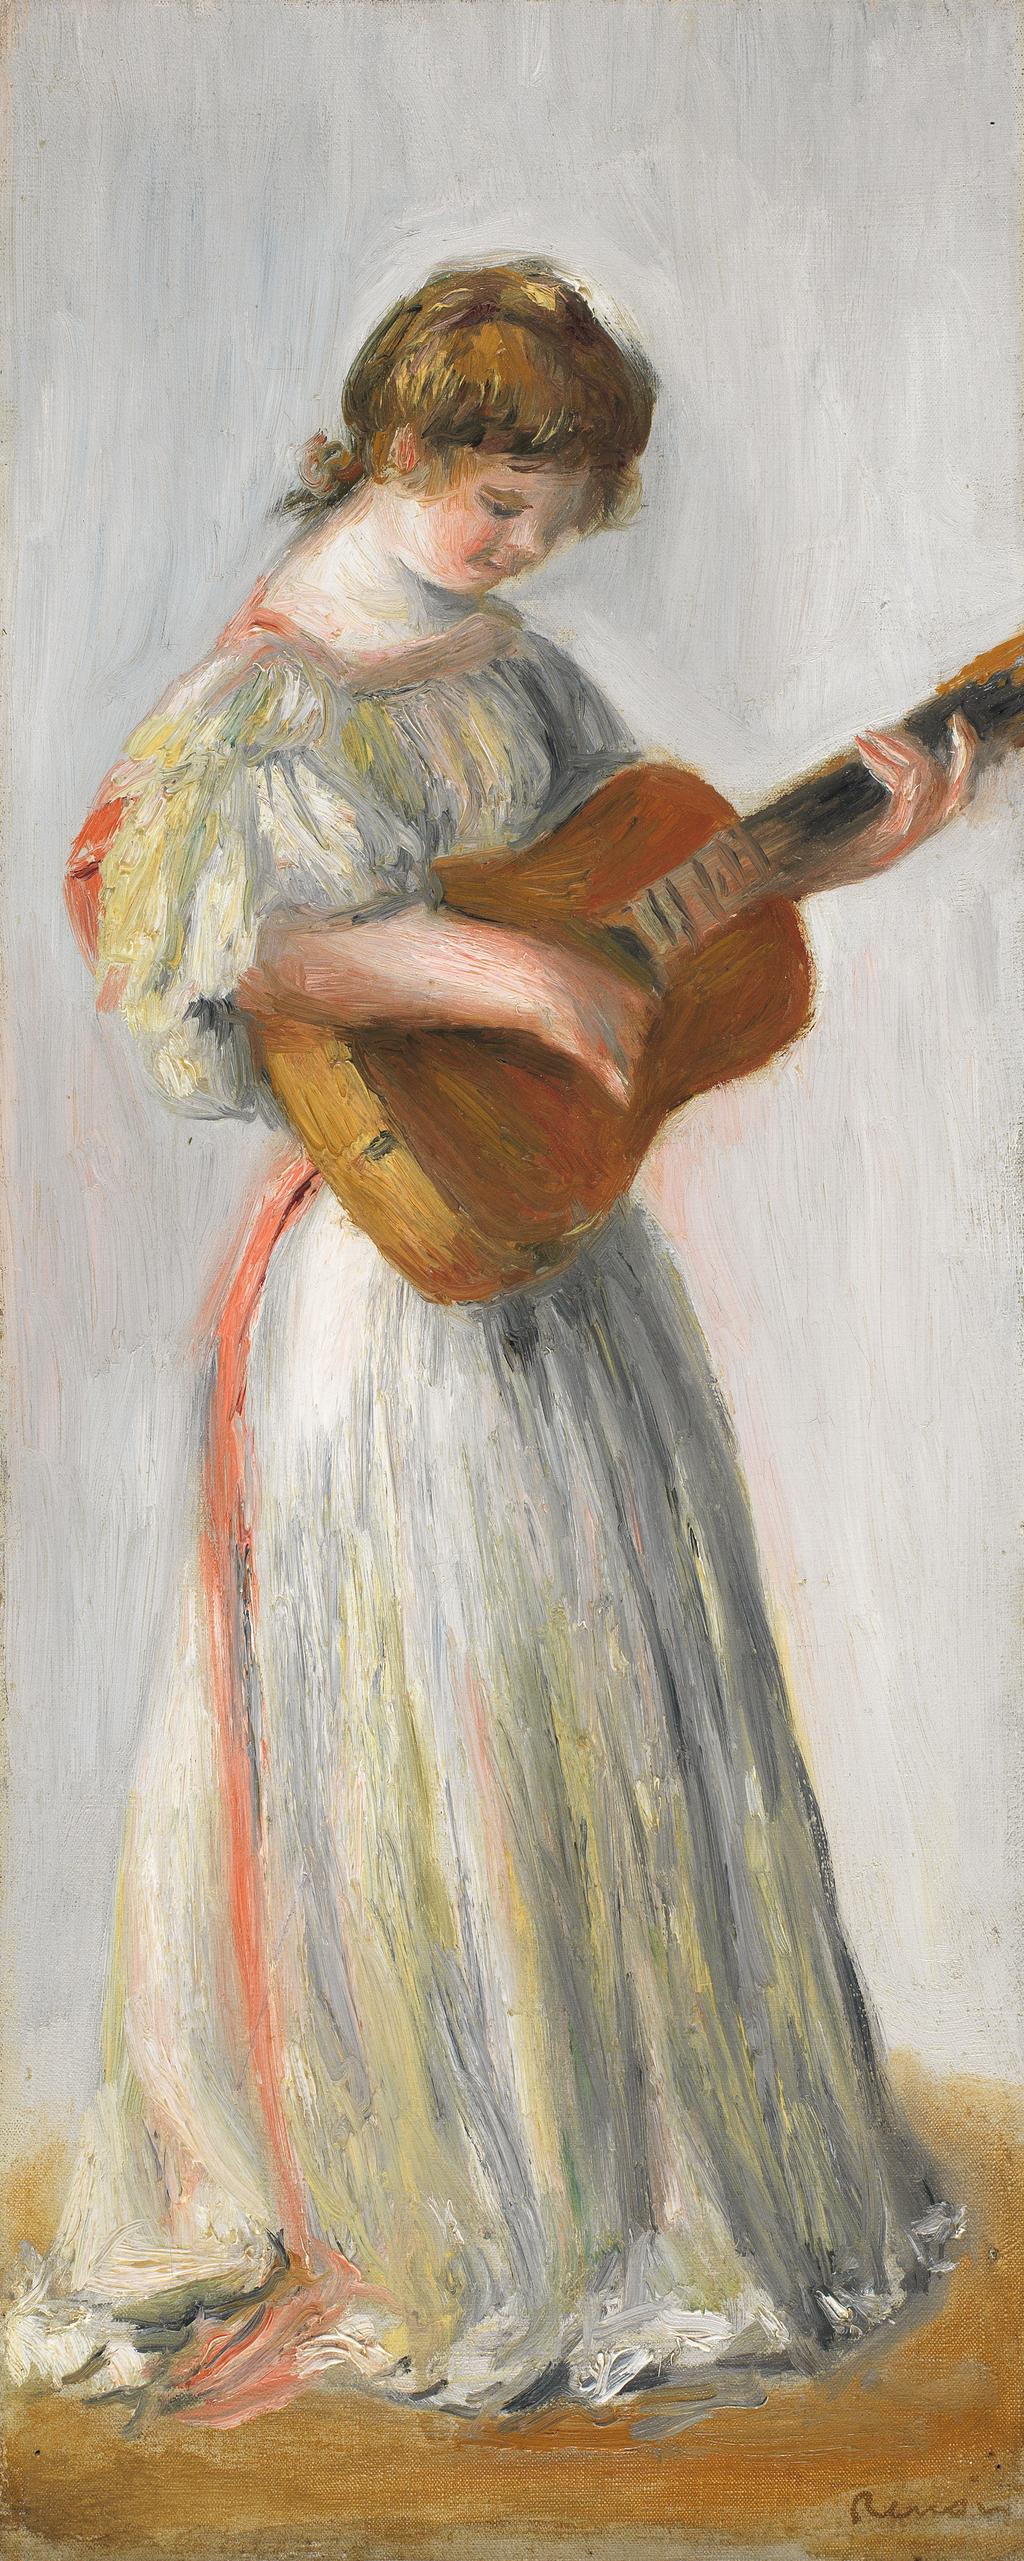 An image of La musique. Translated title: Music. Renoir, Pierre Auguste (French, 1841-1919). Oil on canvas, height 40.0 cm, width 16.5 cm, 1895.